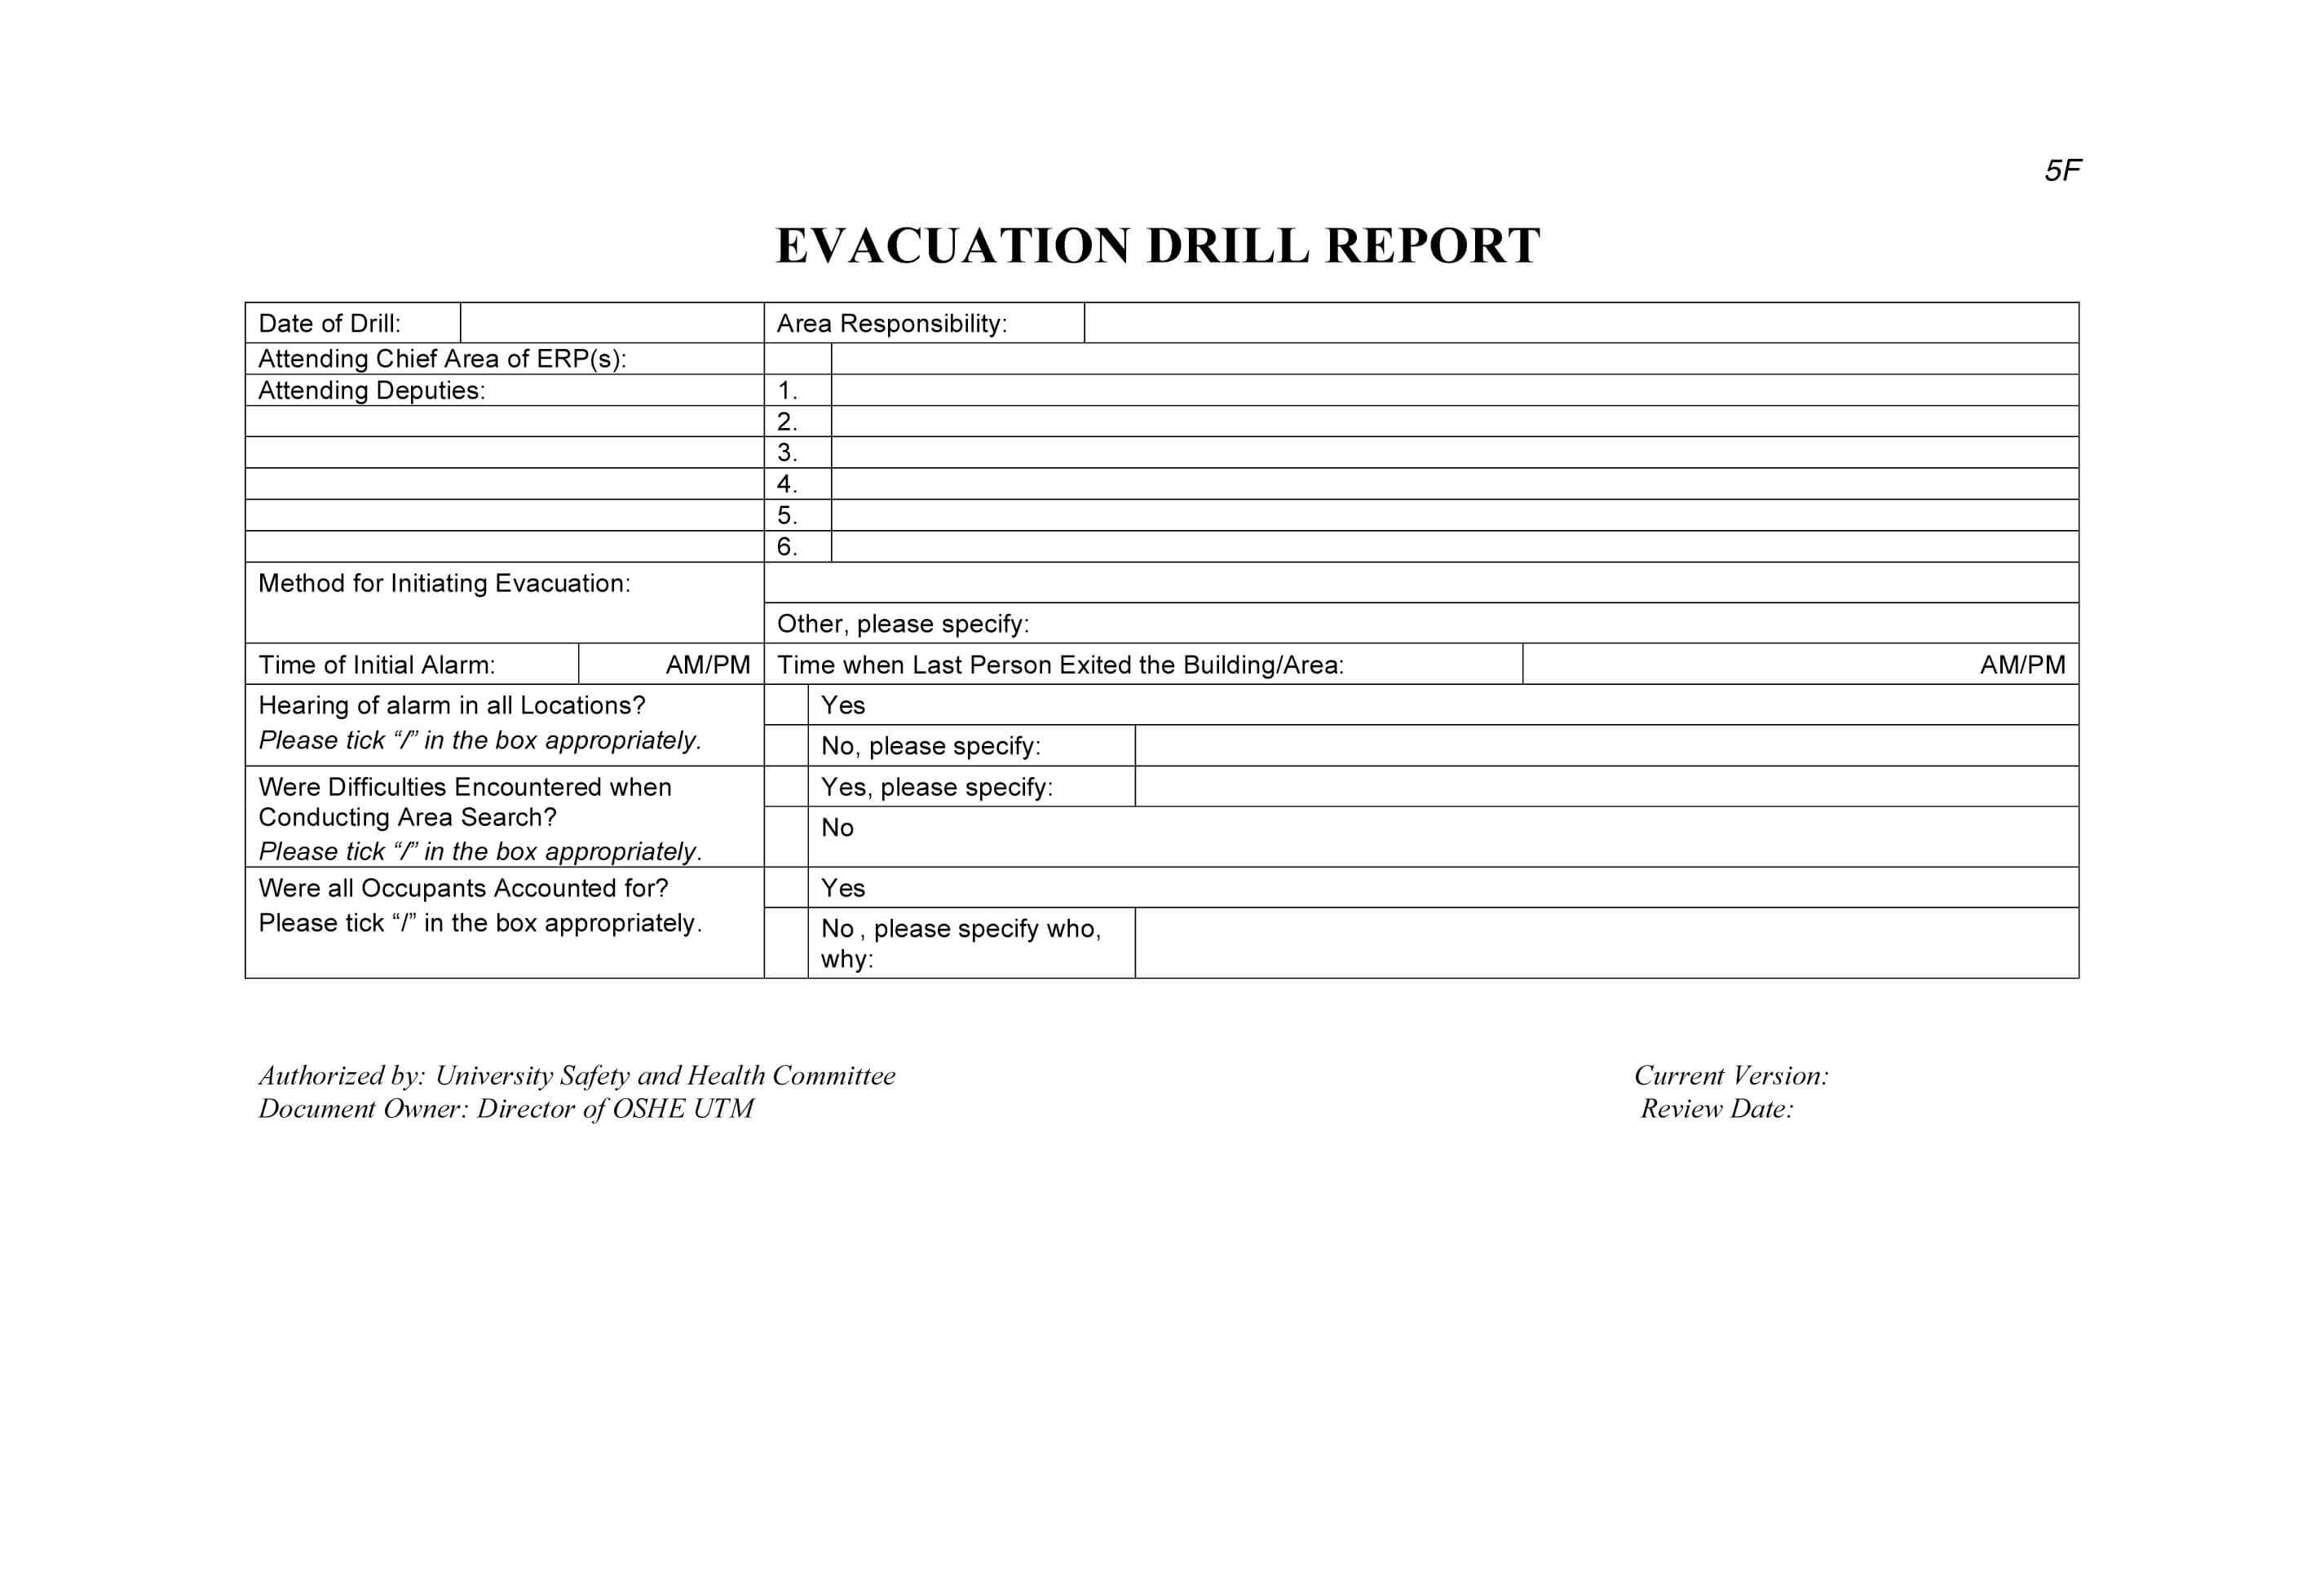 Evacuation Drill Report | Occupational Safety, Health And Regarding Fire Evacuation Drill Report Template